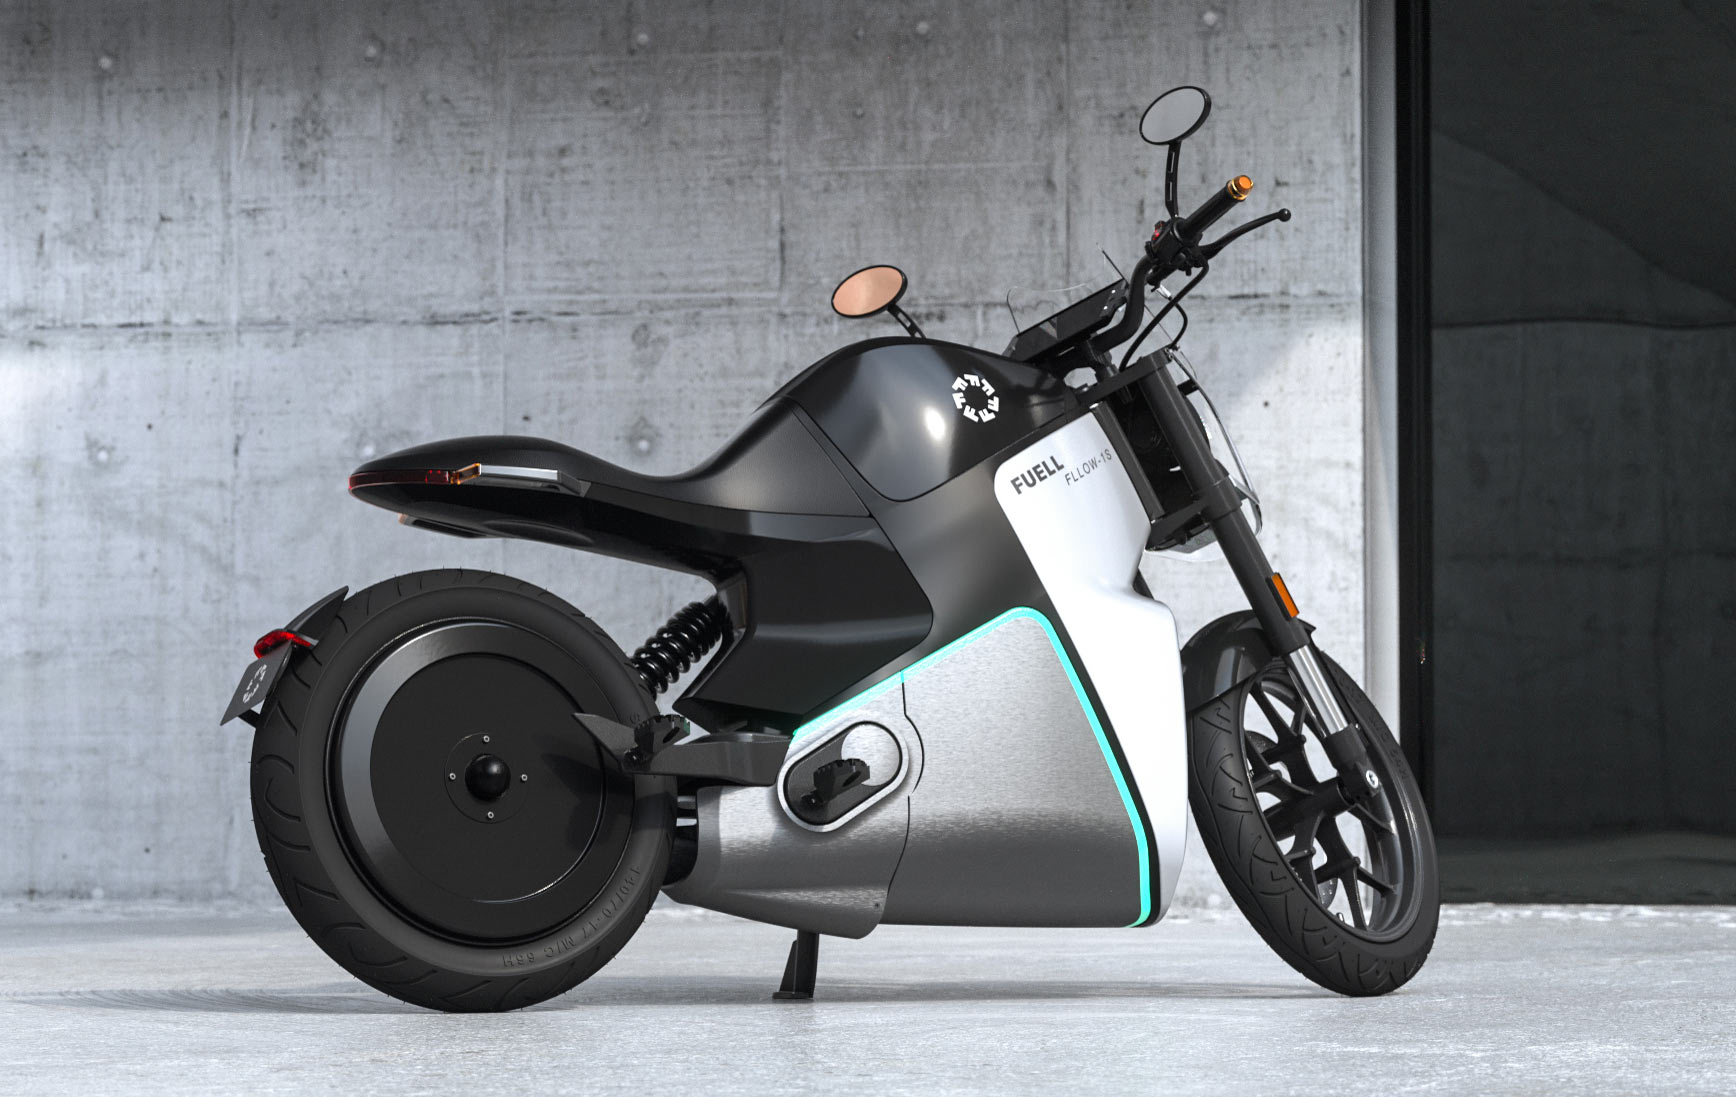 fuell fllow electric motorcycle concept